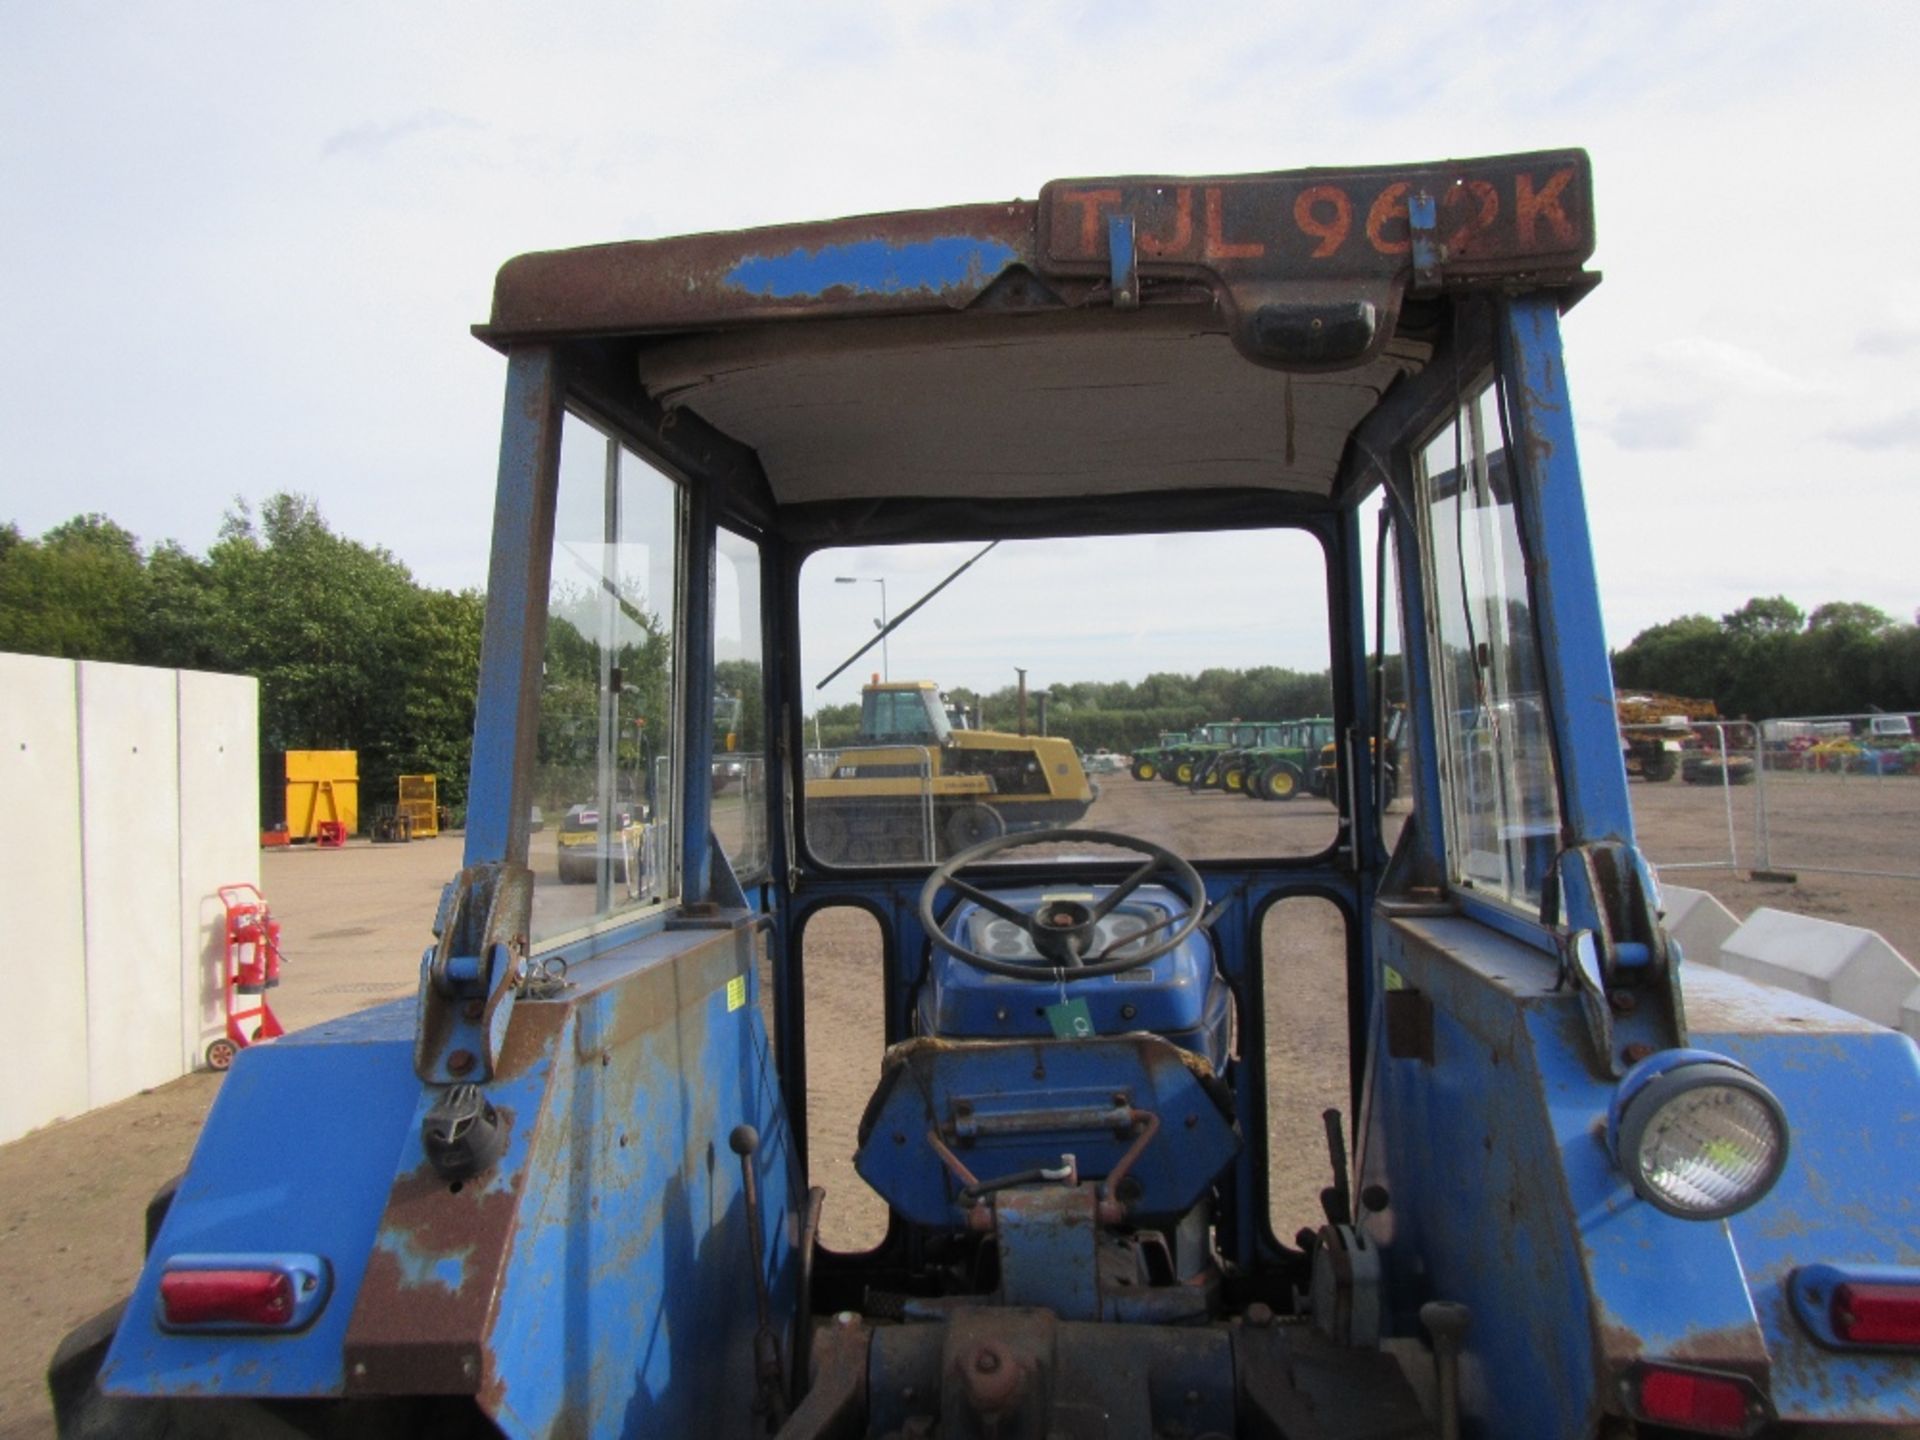 Leyland 384 2wd Tractor with Weights Reg No TJL 962K Ser No 301729 UNRESERVED LOT - Image 8 of 16